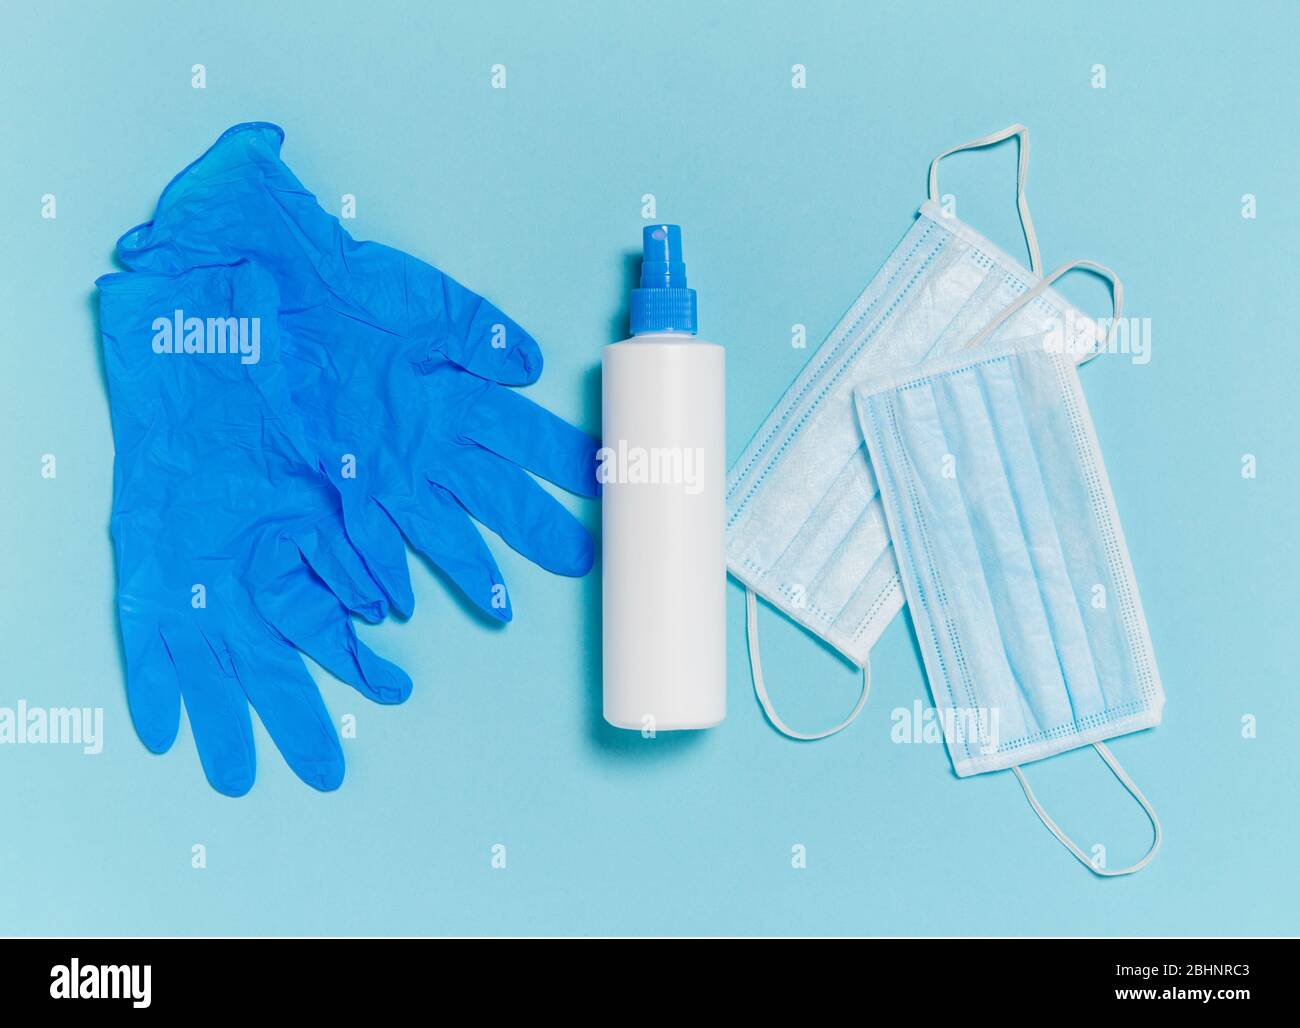 Coronavirus protection. Medical surgical mask, disinfectant or hand sanitizer and disposable gloves on blue background. Hygiene measures to prevent sp Stock Photo